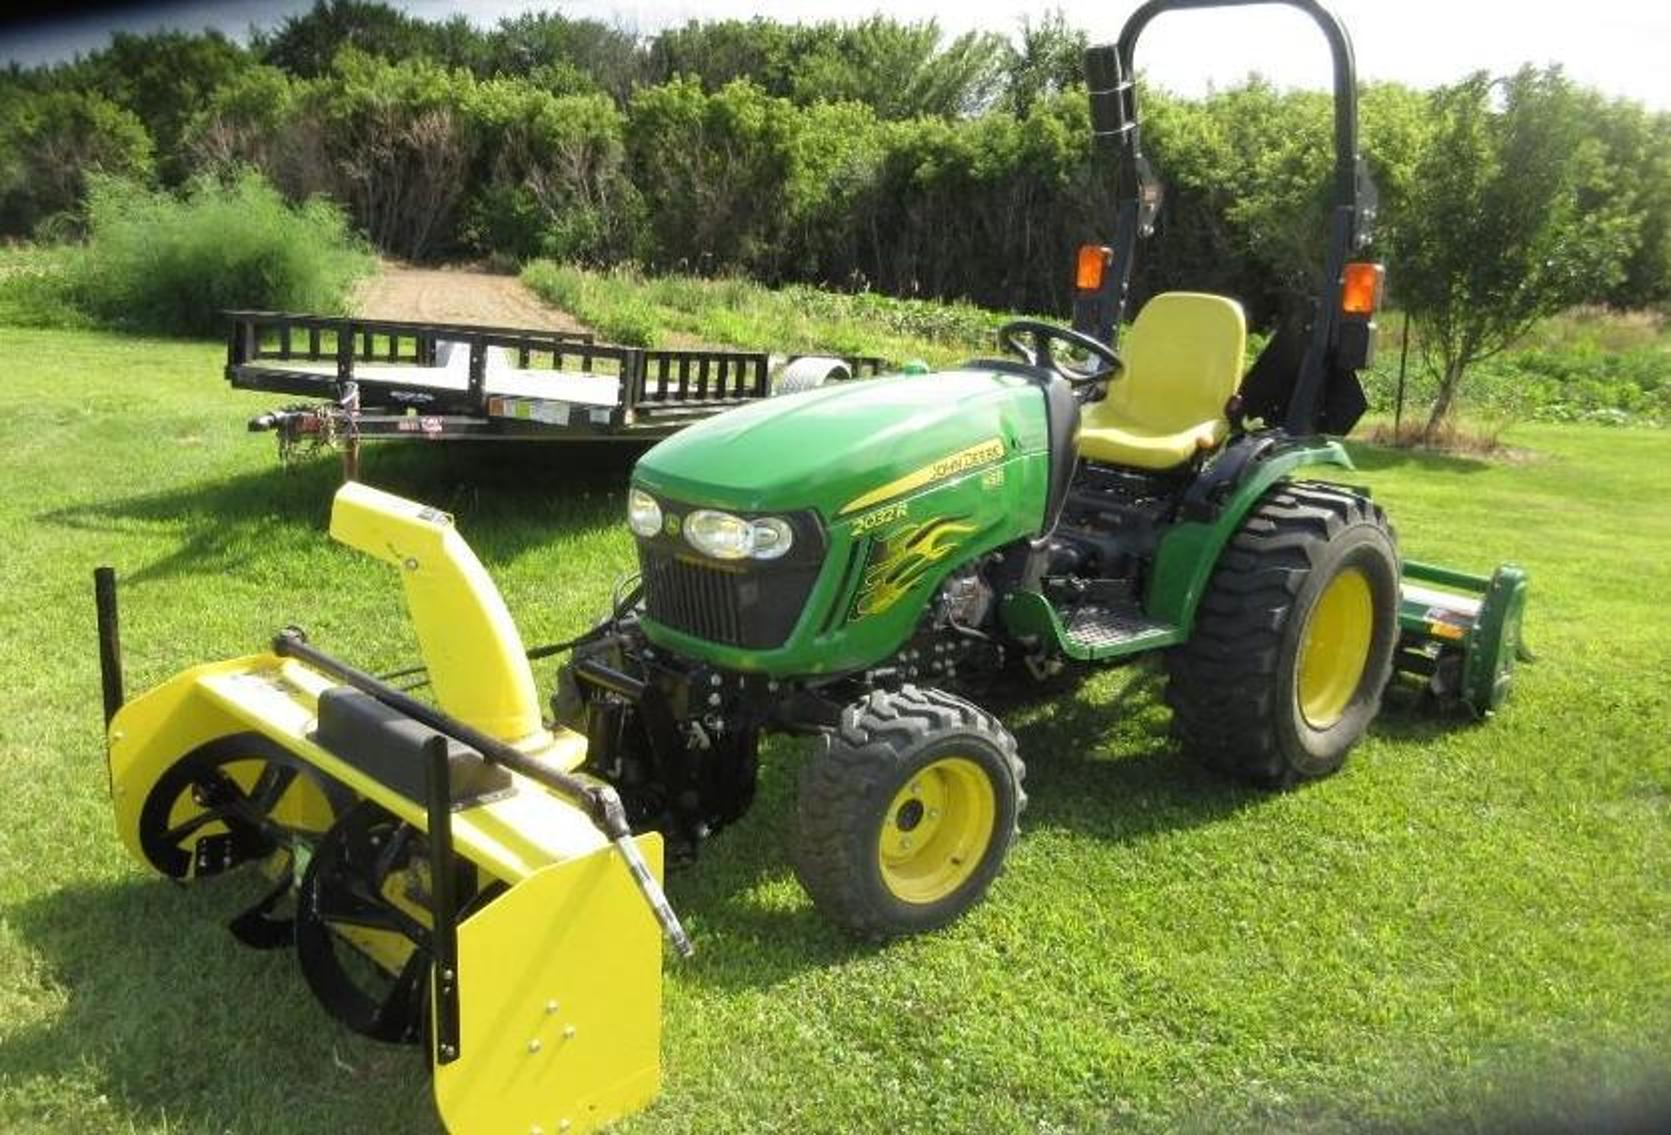 Compact Tractors, Farm Machinery, Trailers, Tools, Misc. and More